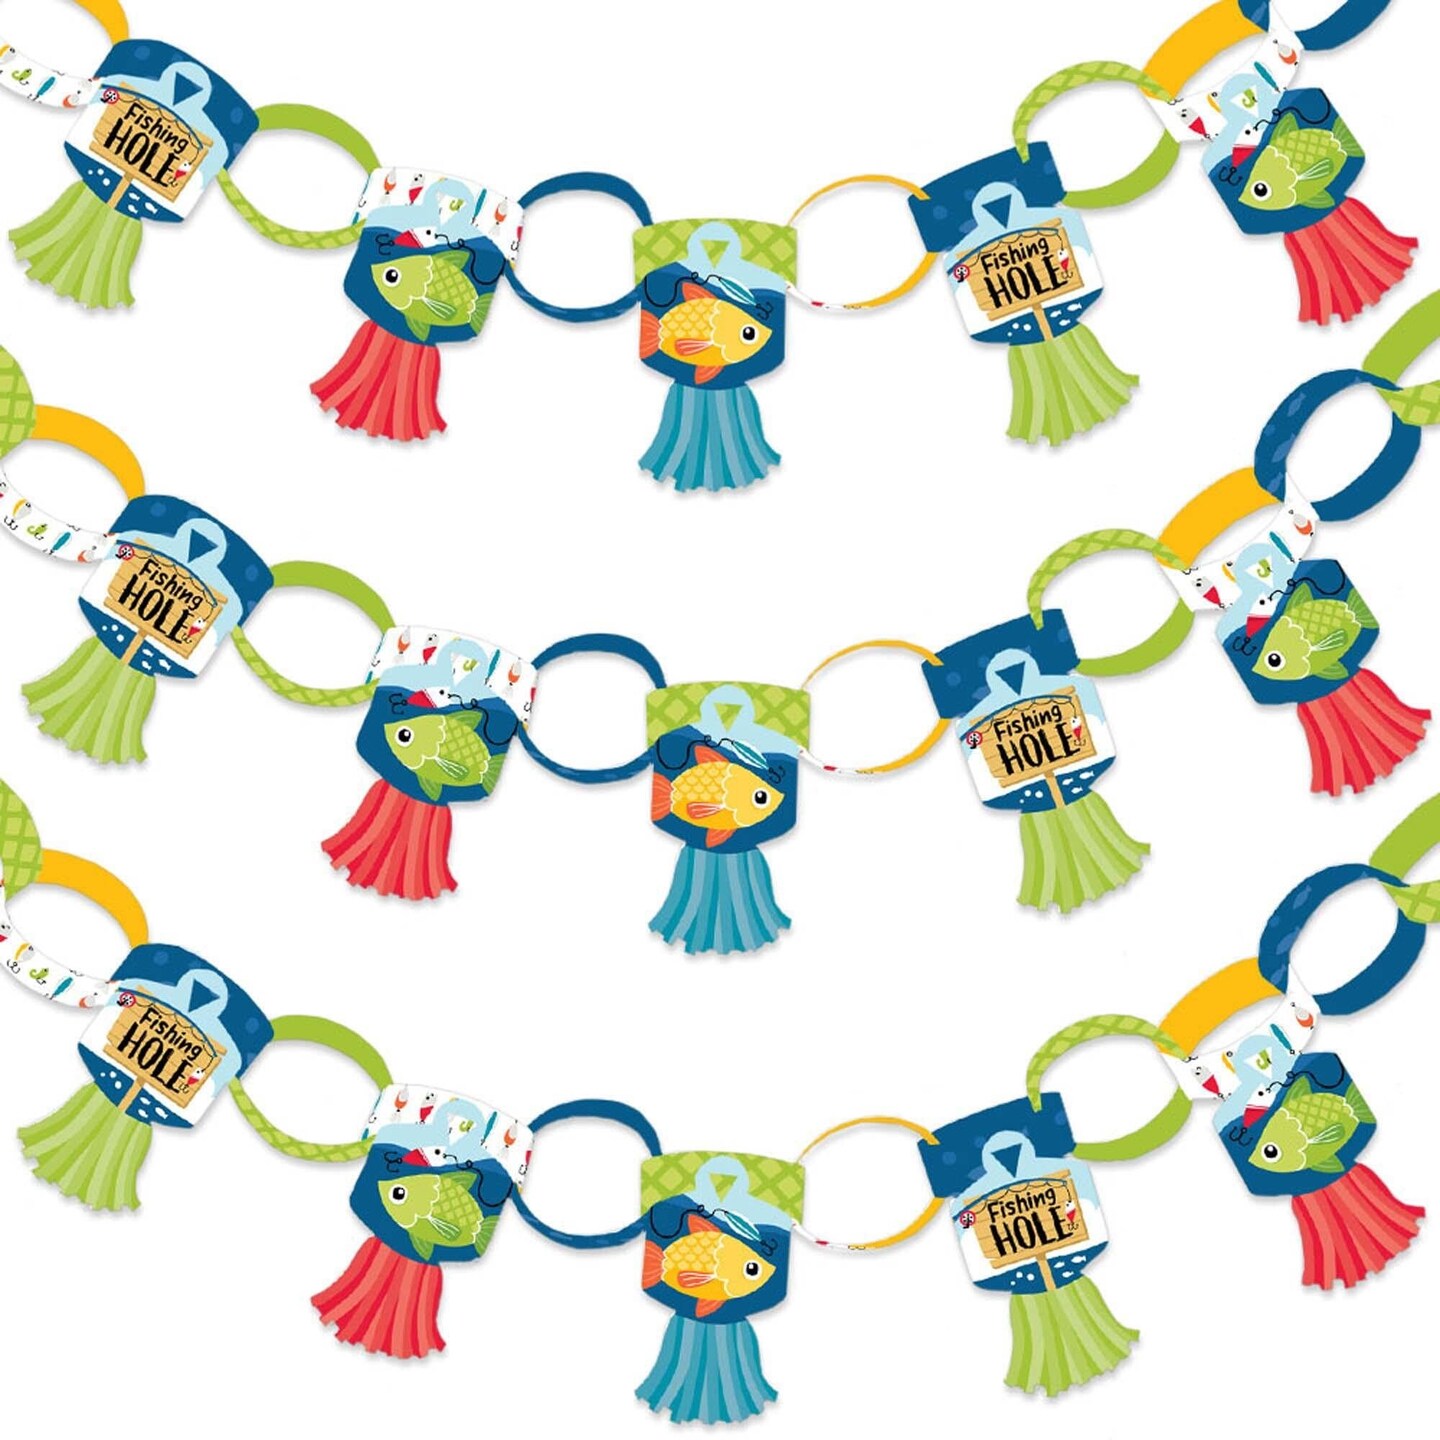 Big Dot of Happiness Let's Go Fishing - 90 Chain Links & 30 Paper Tassels  Decor Kit - Fish Birthday Party or Baby Shower Paper Chains Garland - 21 ft